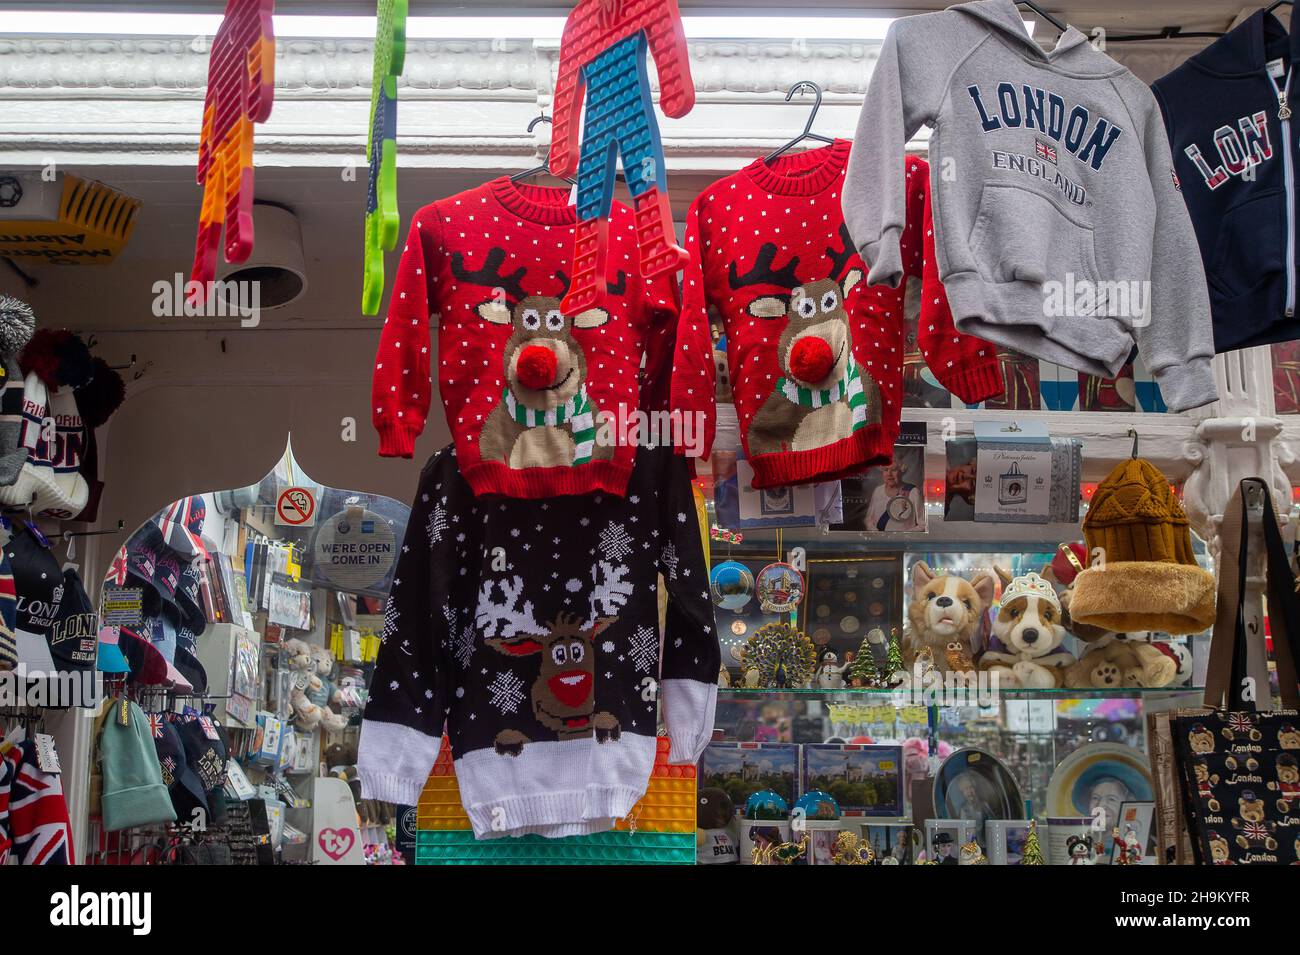 Windsor, Berkshire, UK. 7th December, 2021. Christmas jumpers for sale in a tourist shop in Windsor. As more countries join the Covid-19 red list, less tourists will be arriving in the UK again. Credit: Maureen McLean/Alamy Stock Photo